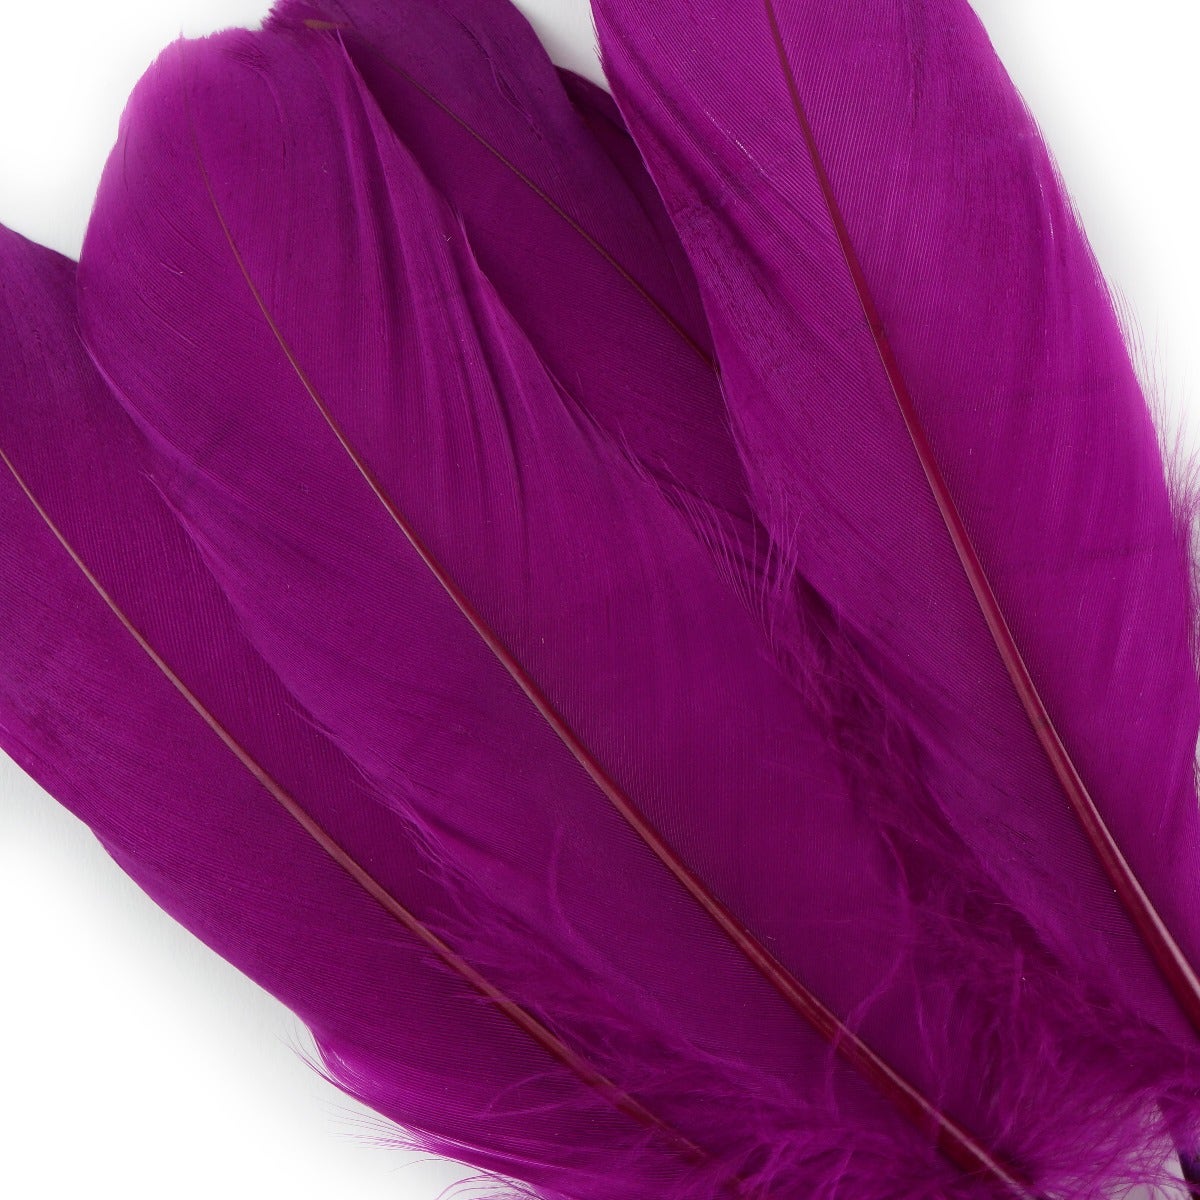 Goose Pallet Feathers 6-8" - 12 pc - Very Berry